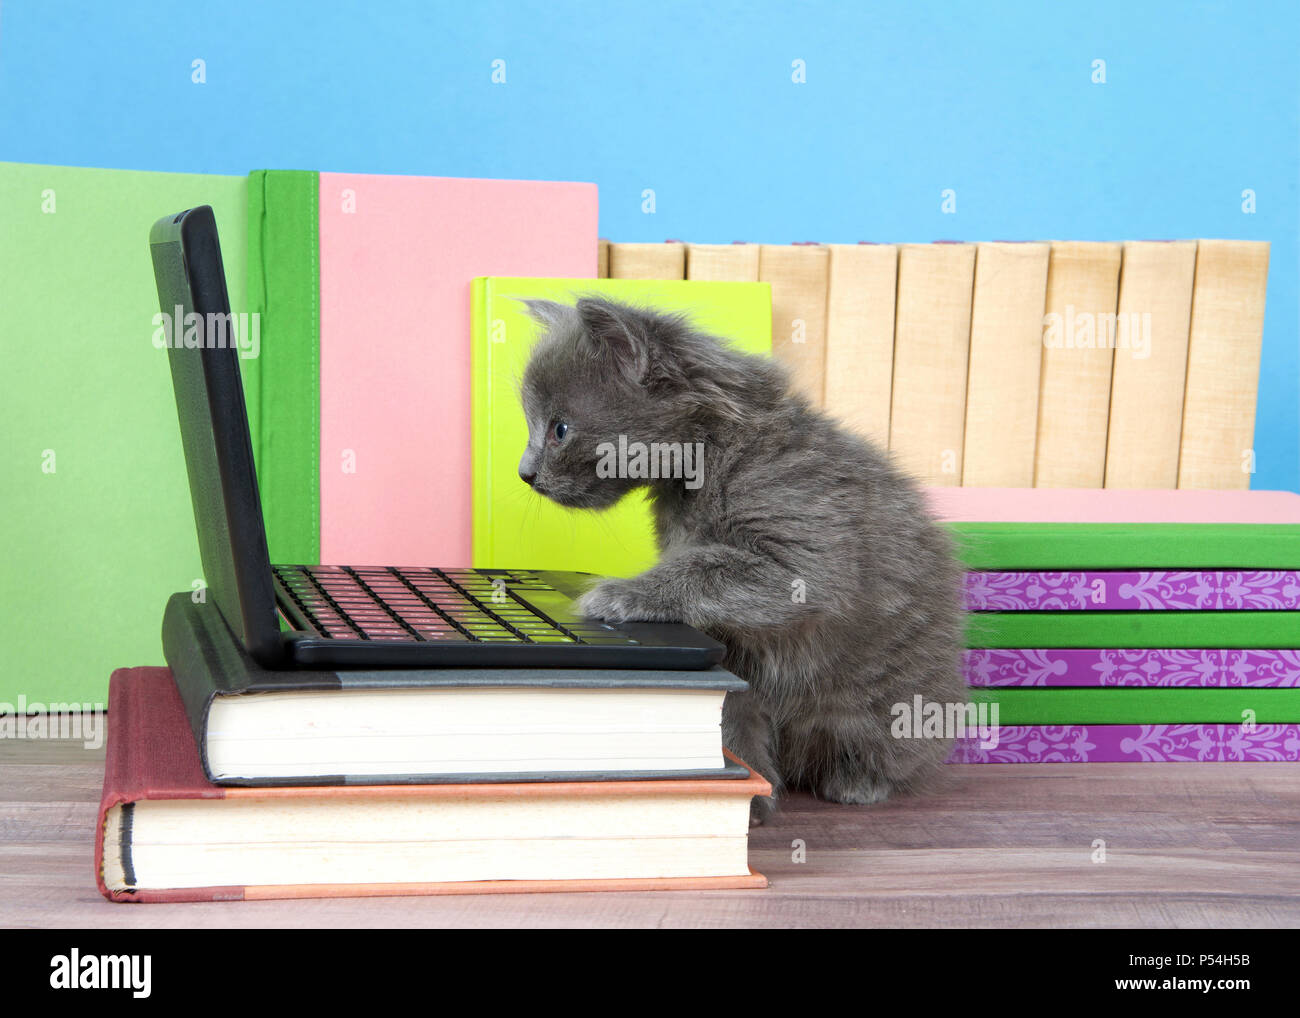 one fluffy cute small kitten sitting next to a miniature laptop computer on a desk of books with books behind, wood floor, blue wall background. Paw o Stock Photo